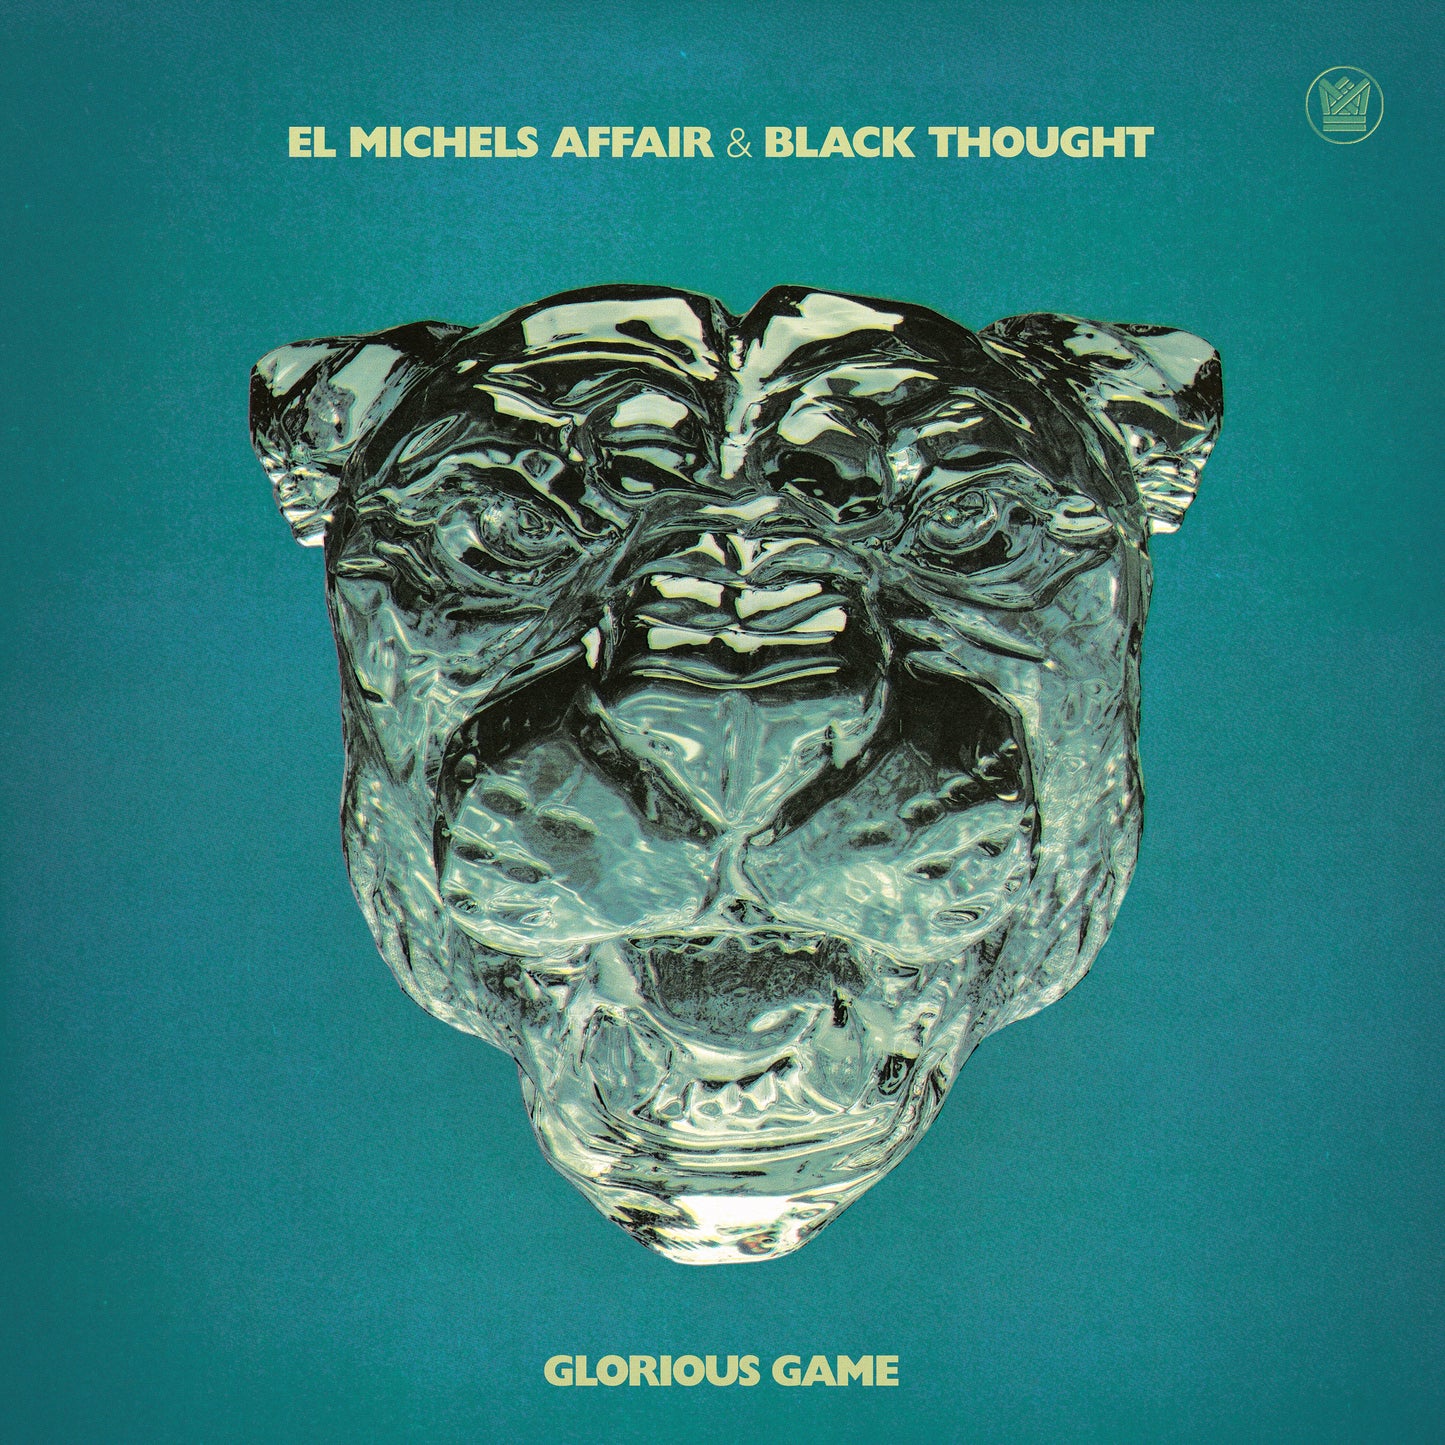 El Michels Affair & Black Thought – Glorious Game